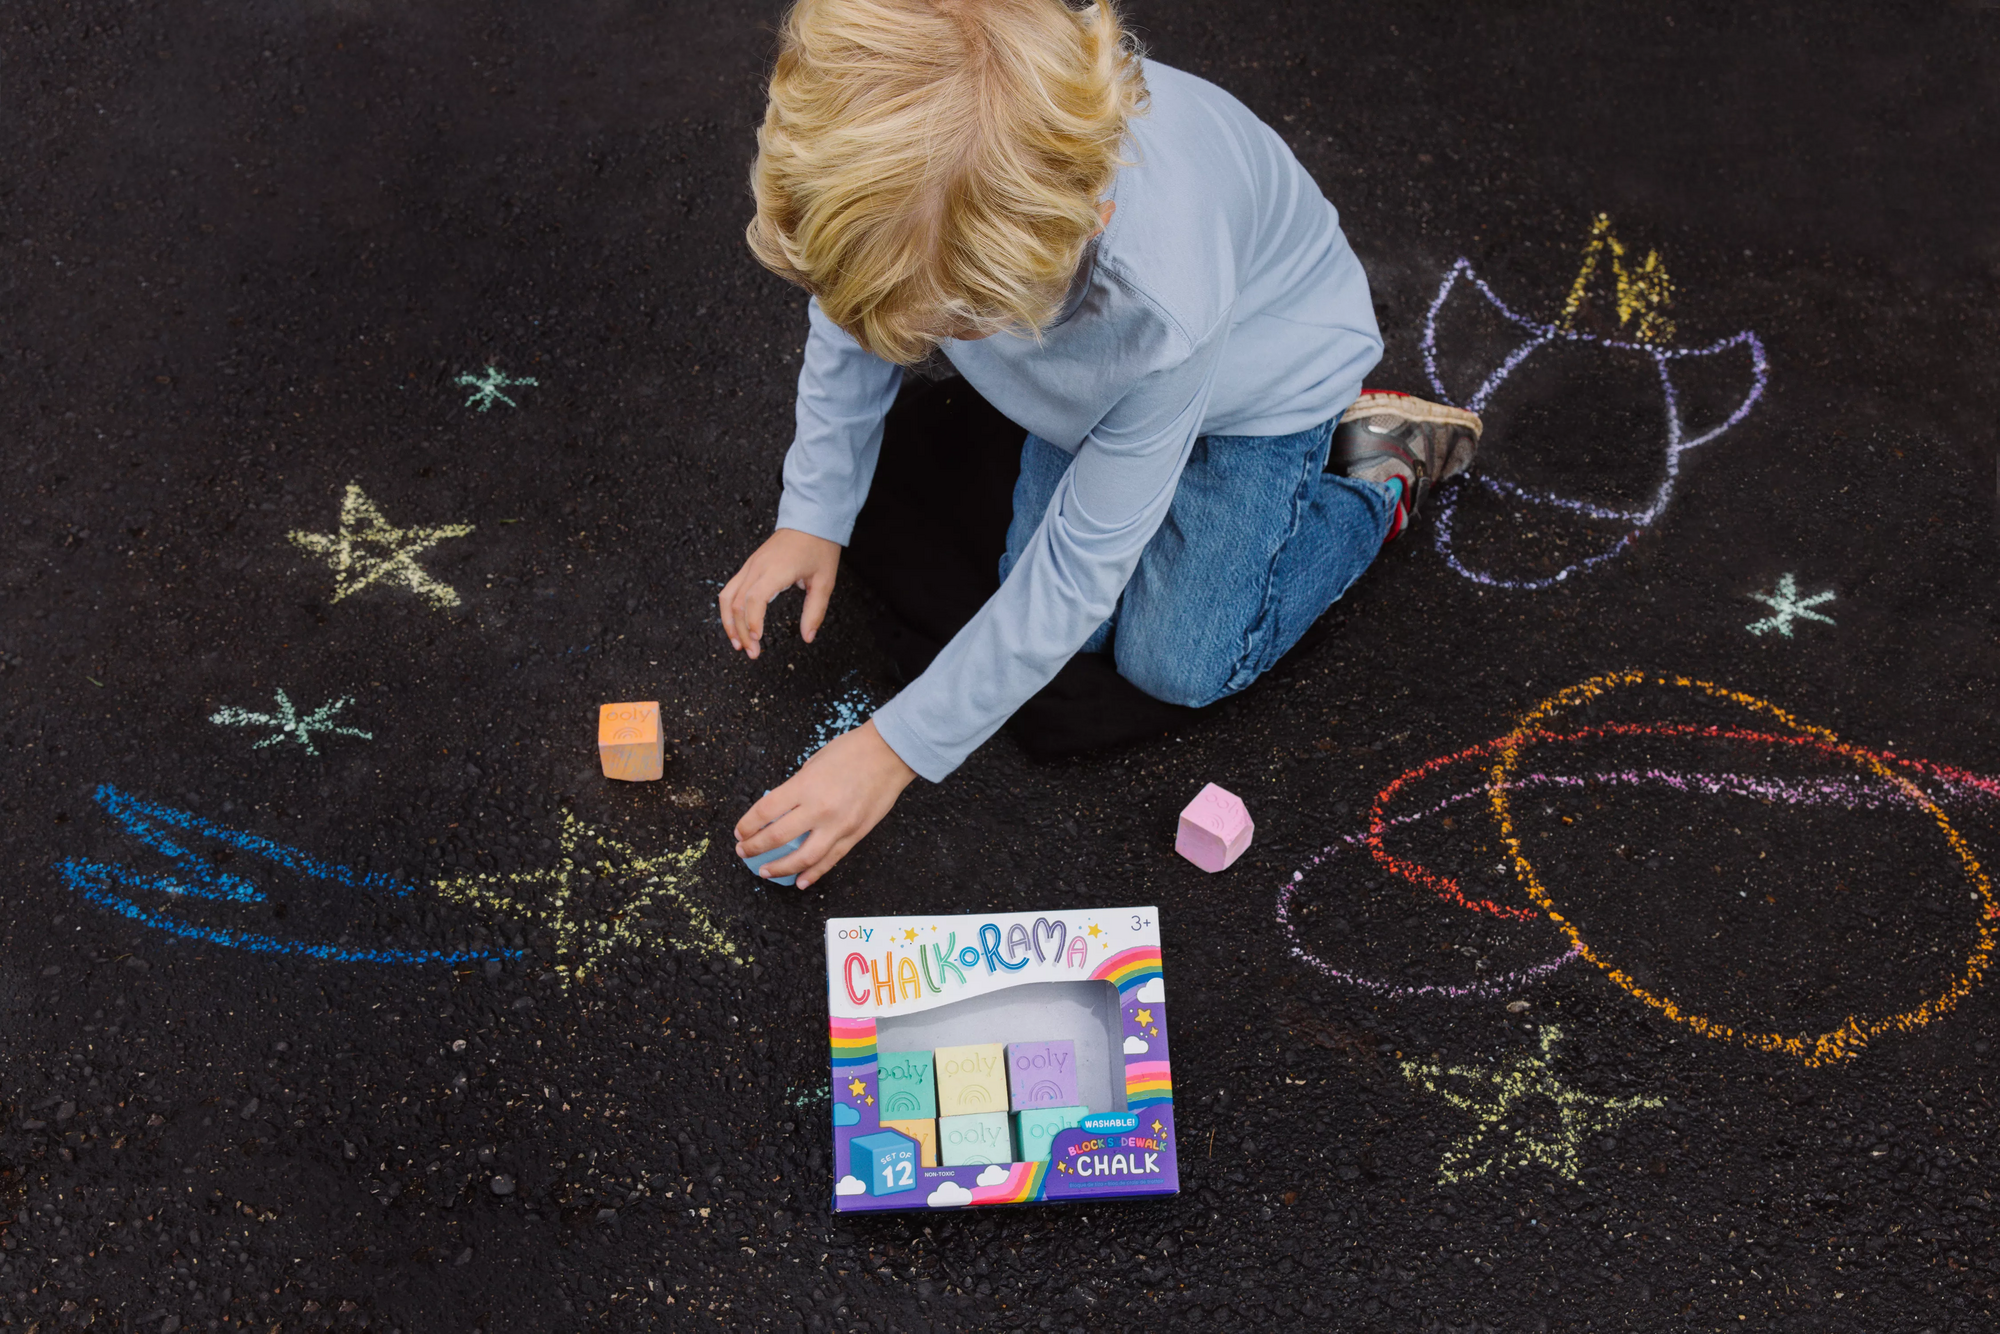 Child drawing space shapes with OOLY Chalk-O-Rama Block Sidewalk Chalk on blacktop